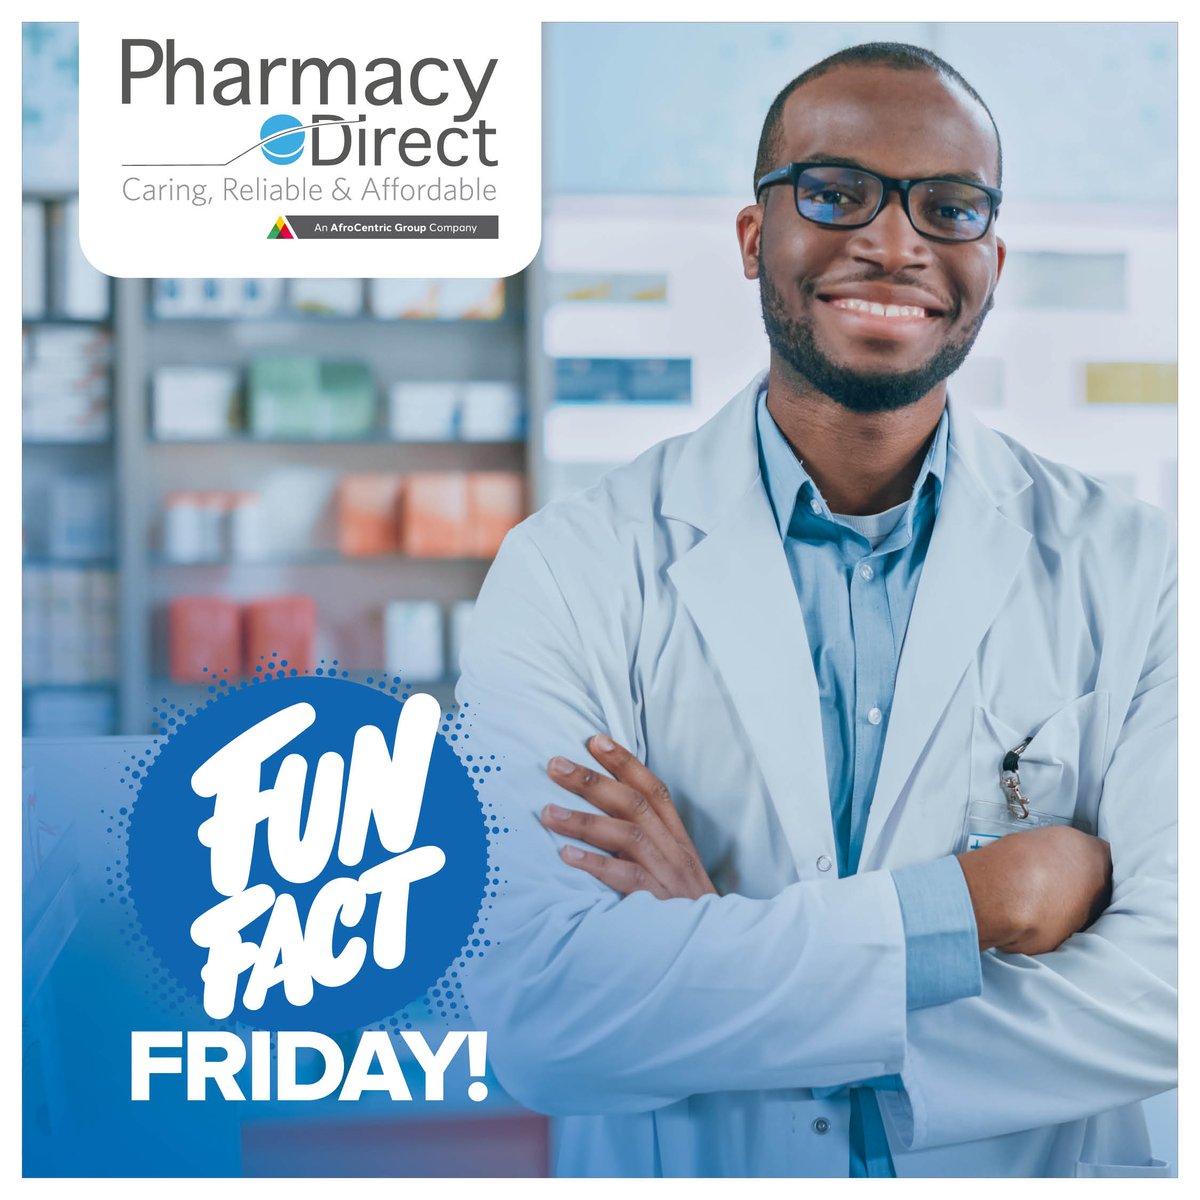 DYK?!

Behind every great pharmacist is an amazing team of pharmacy support personnel. Thank you for your hard work and dedication to ensure that our patients receive the best care possible! 💊❤️ #PharmacySupport #GratefulPatients #HealthcareHeroes